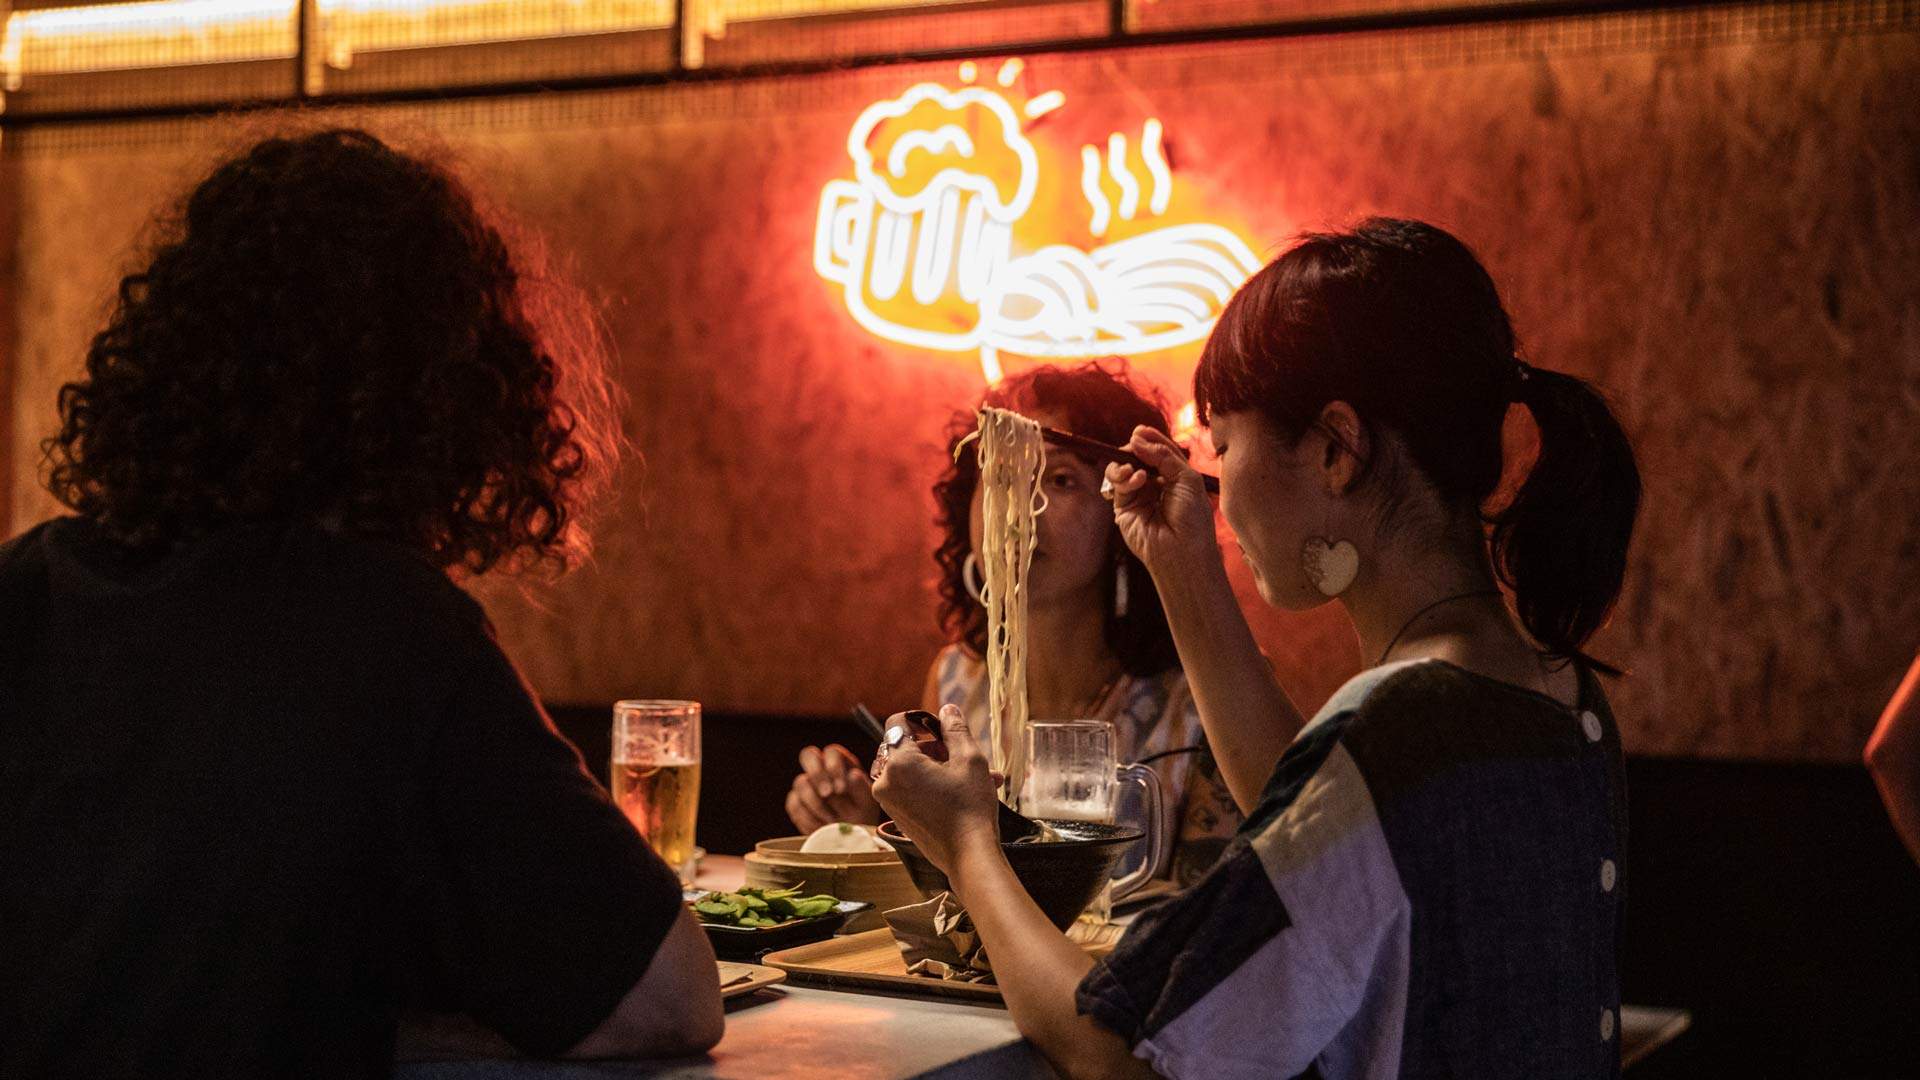 Sydney's Super-Popular Ramen Bar RaRa Is Opening Its First Queensland Outpost in May